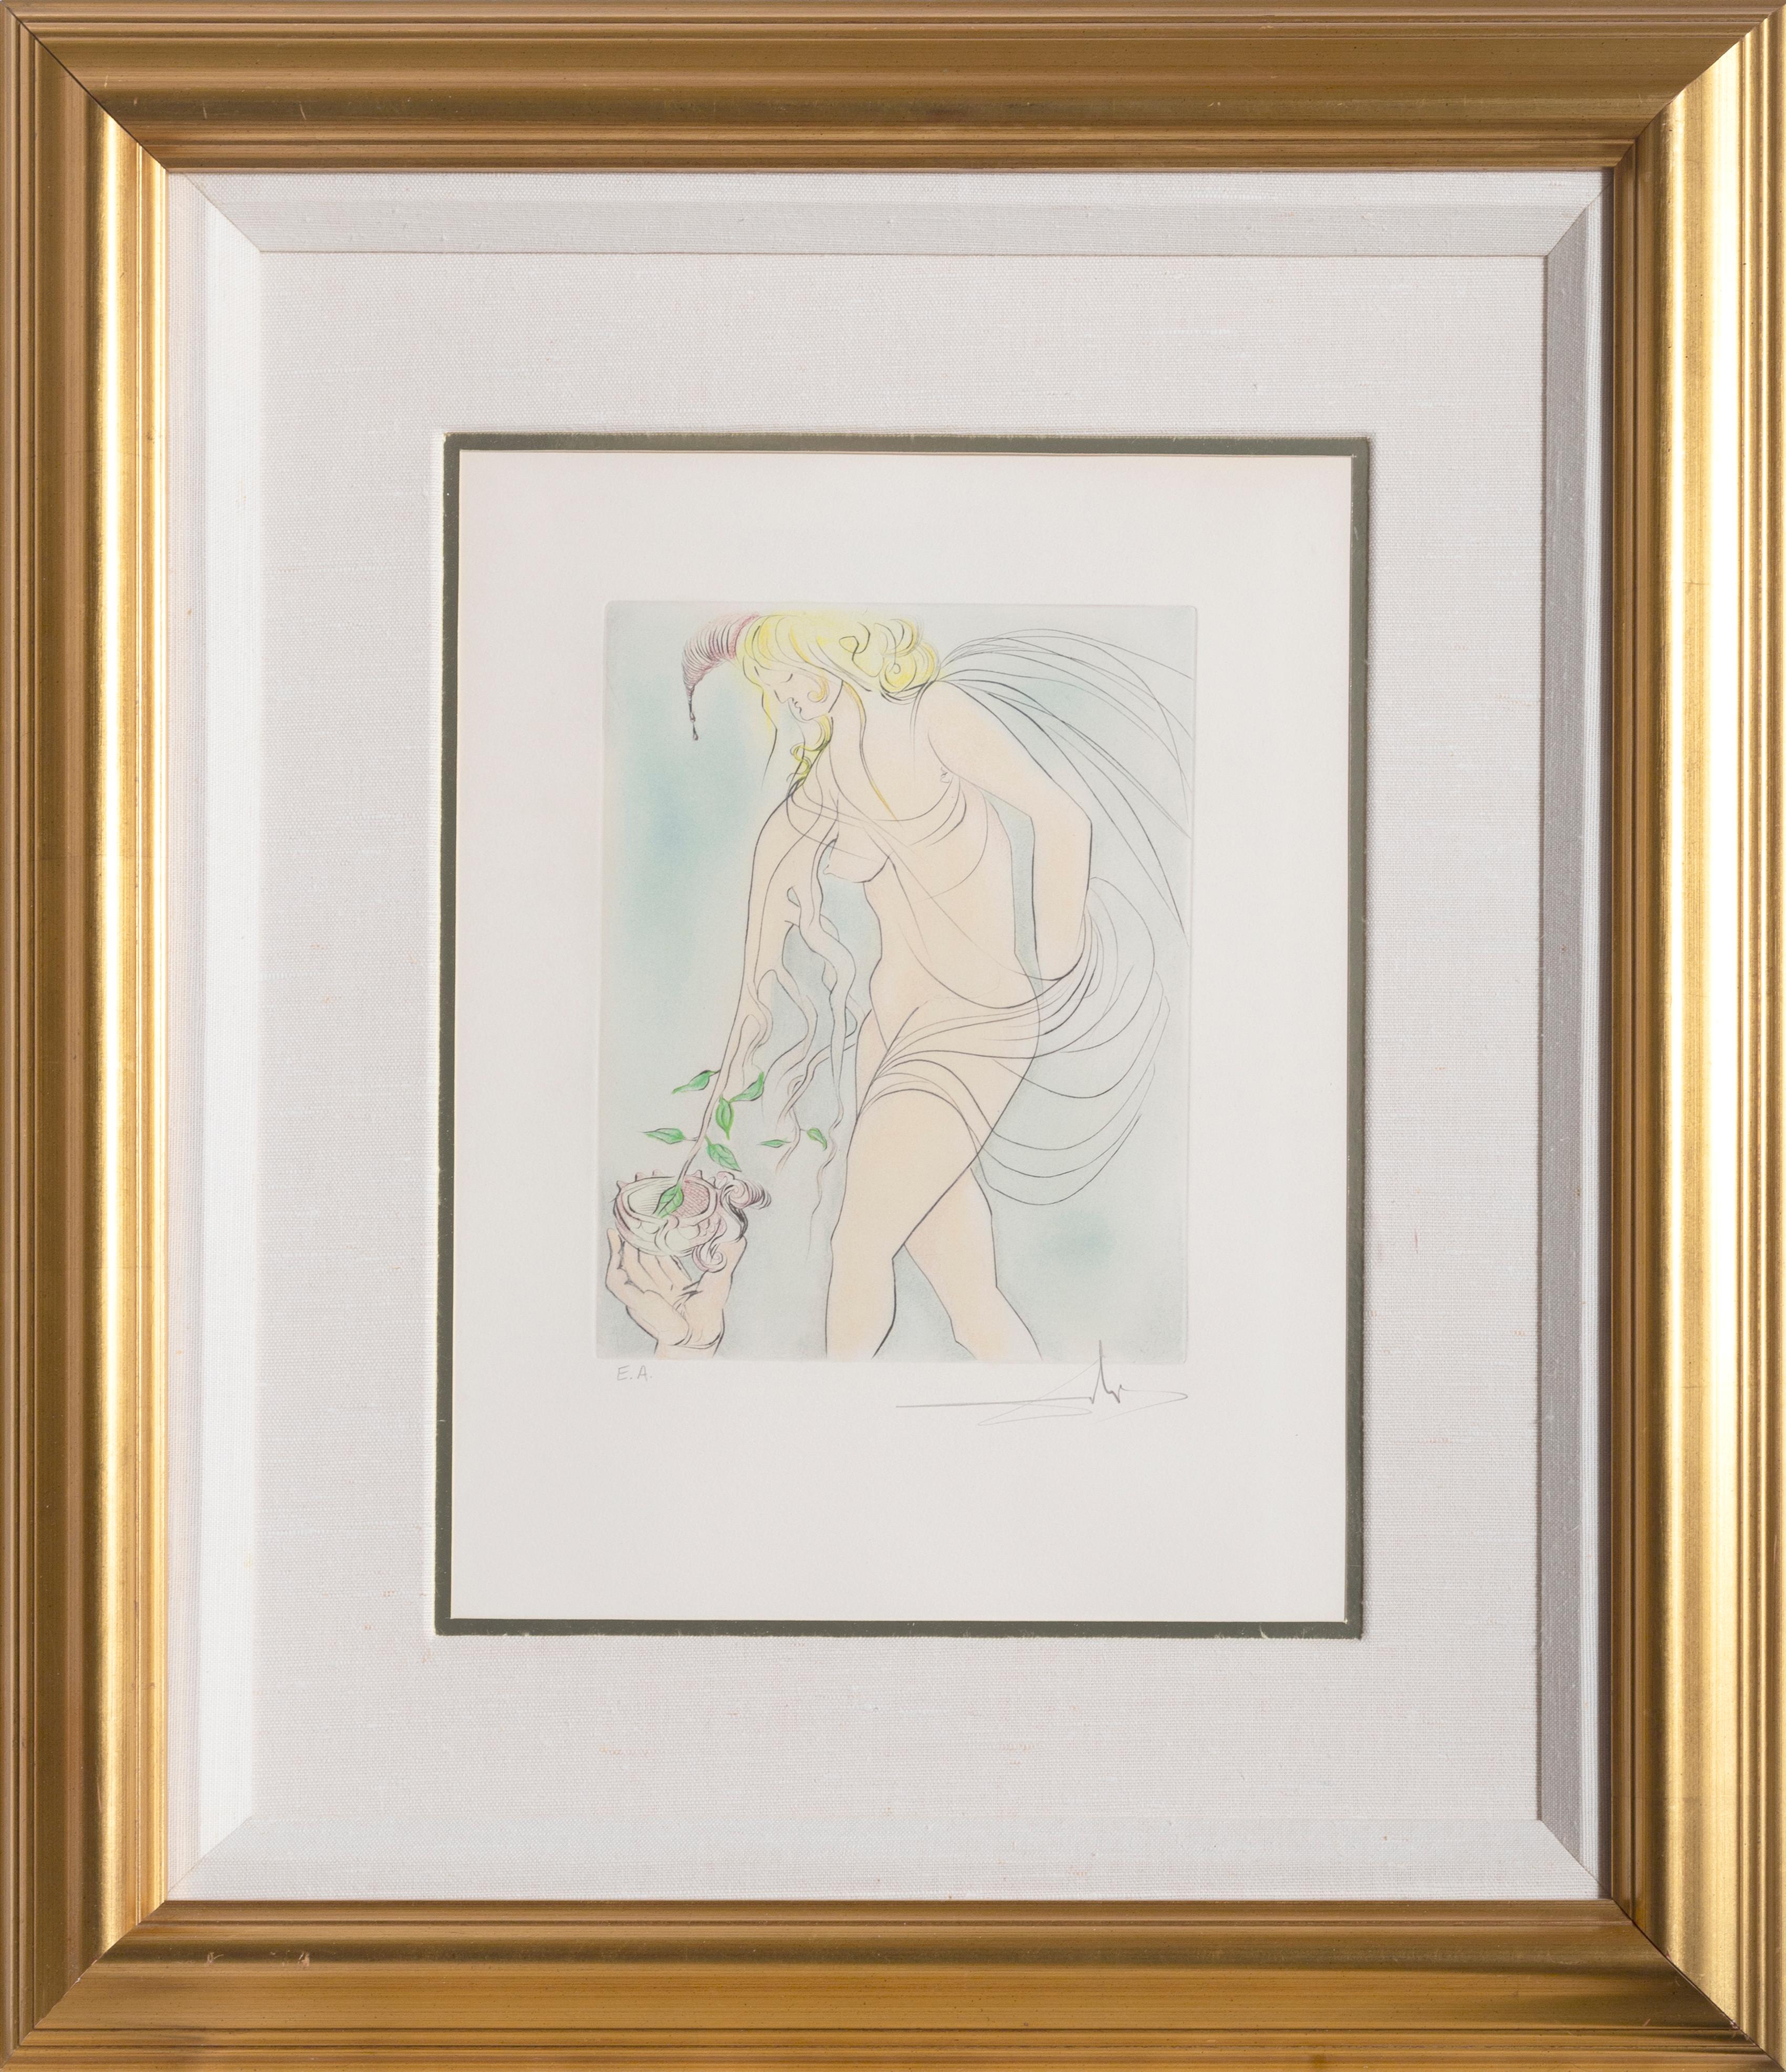 Salvador Dalí Figurative Print - The Cup Offered, Framed Etching by Salvador Dali